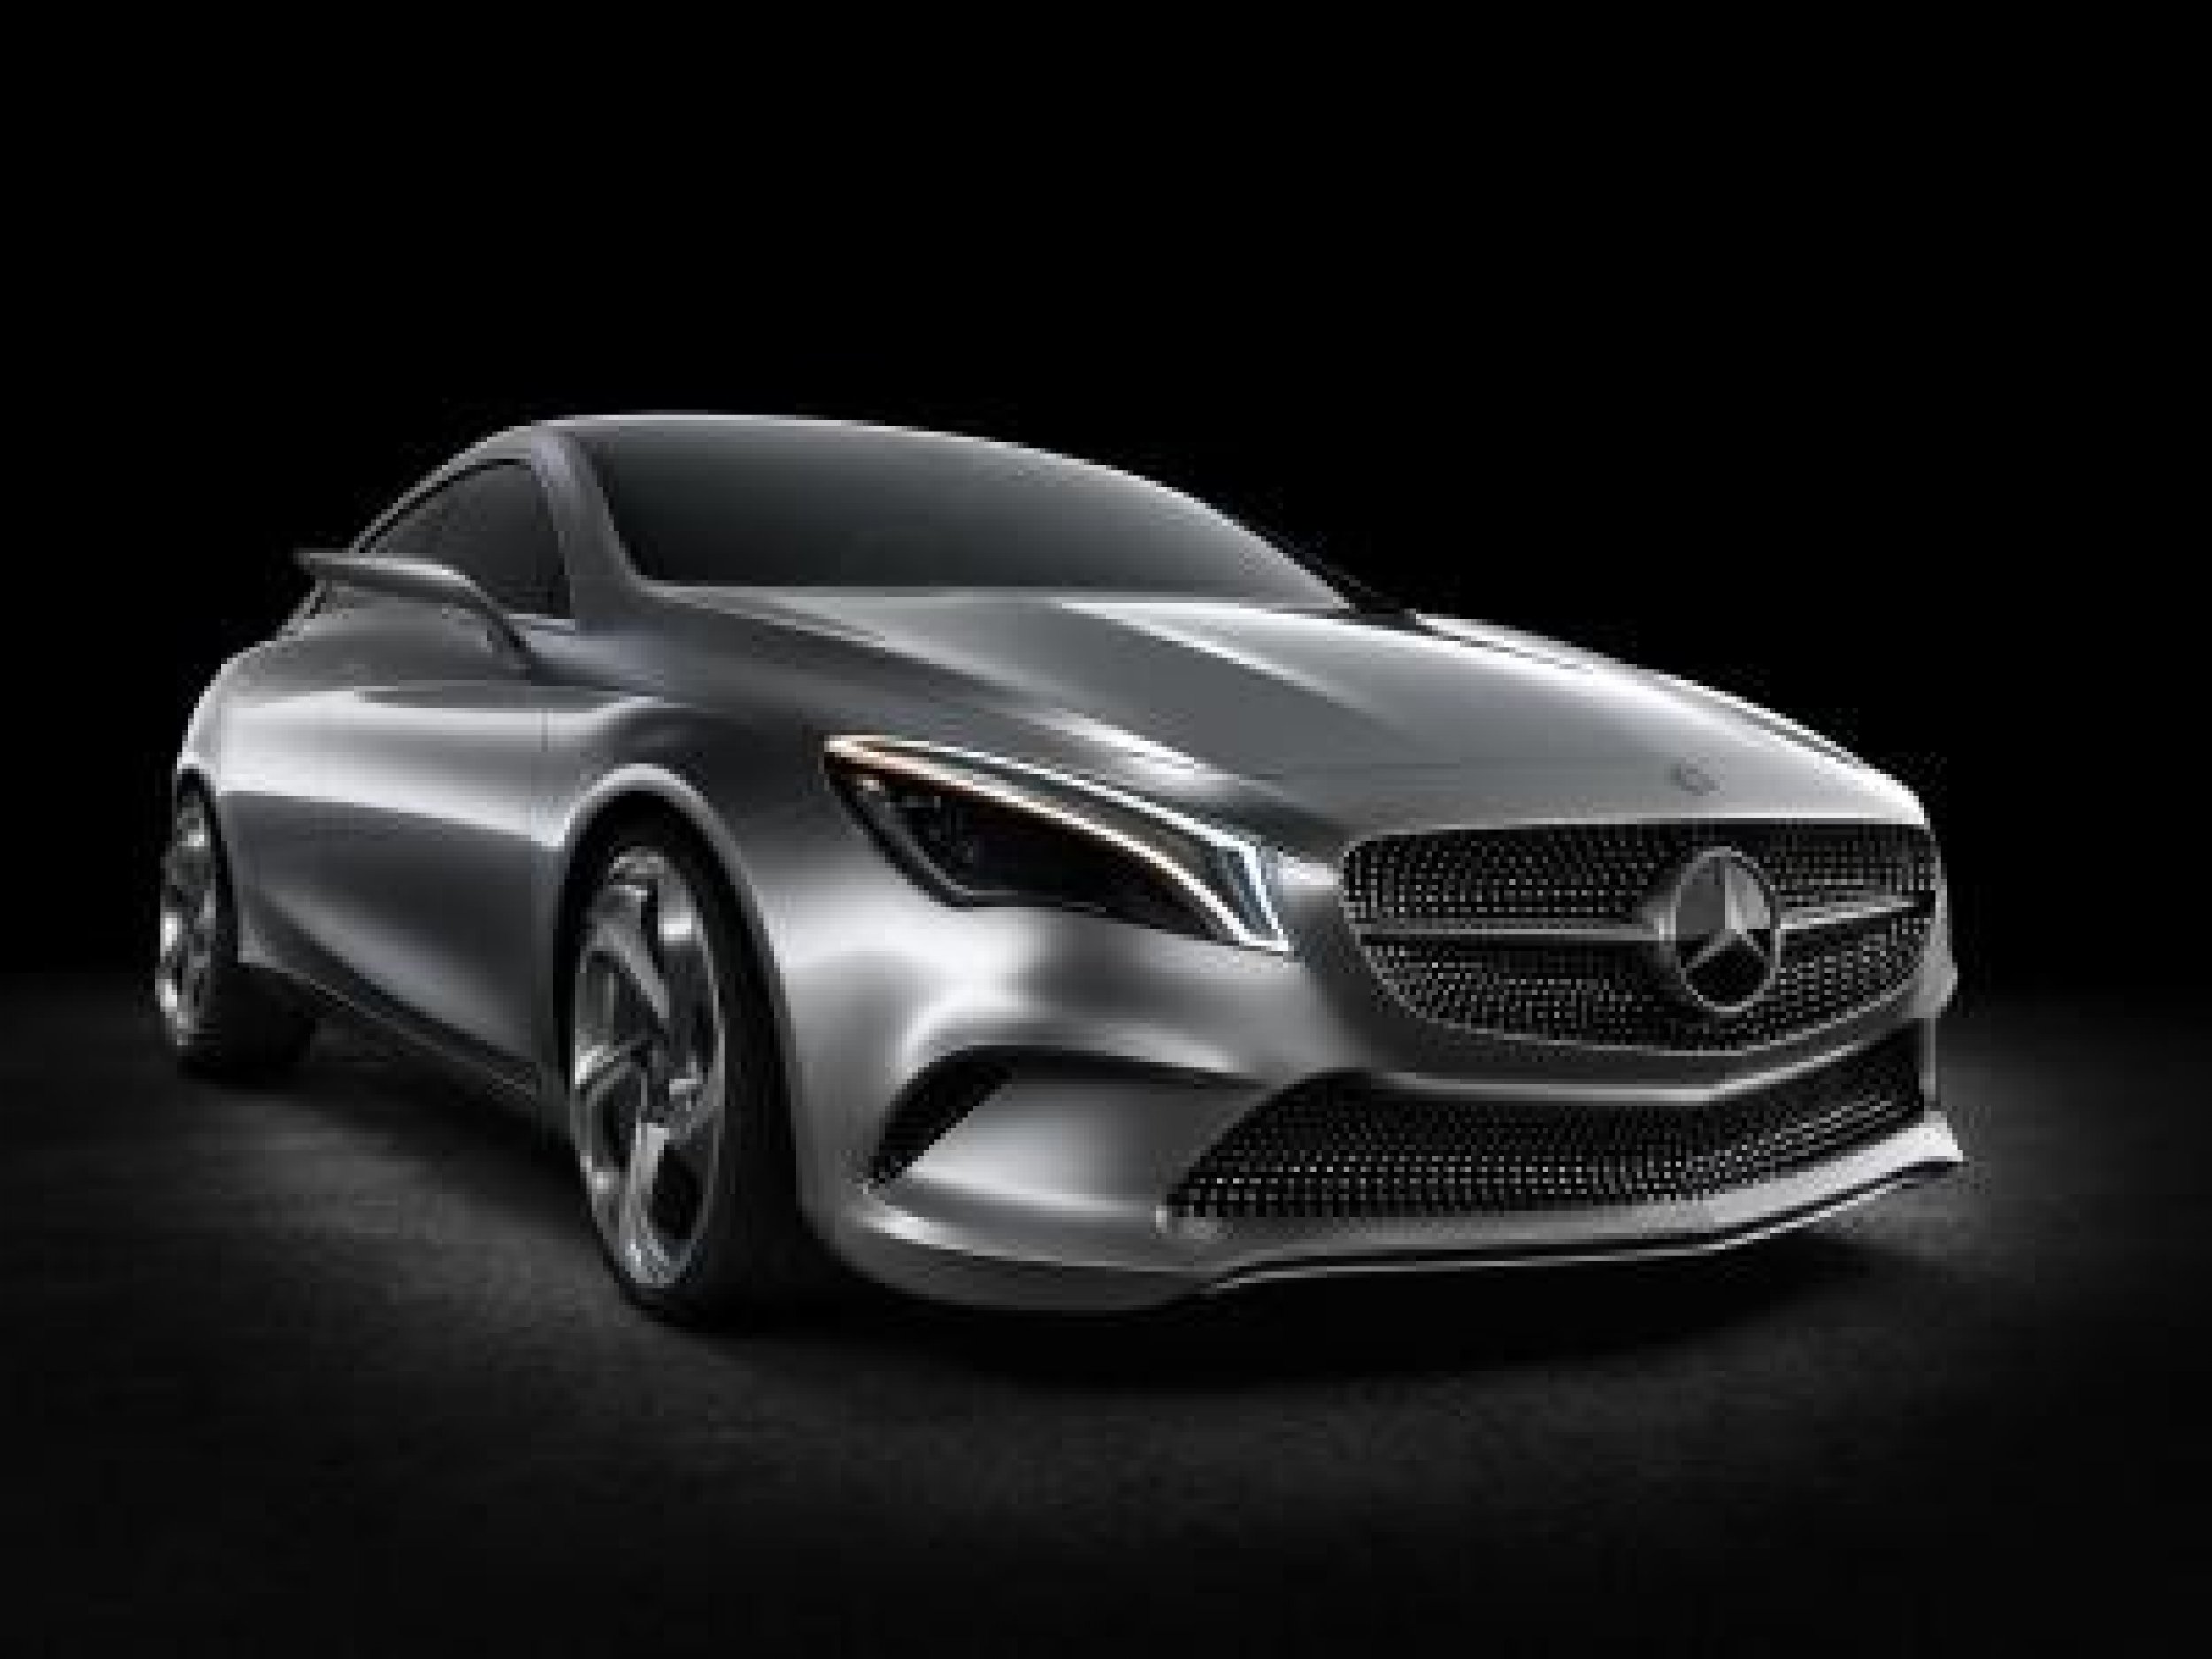 From the front, the new Mercedes Benze Concept Coupe looks like one of the Finding Nemo sharks.